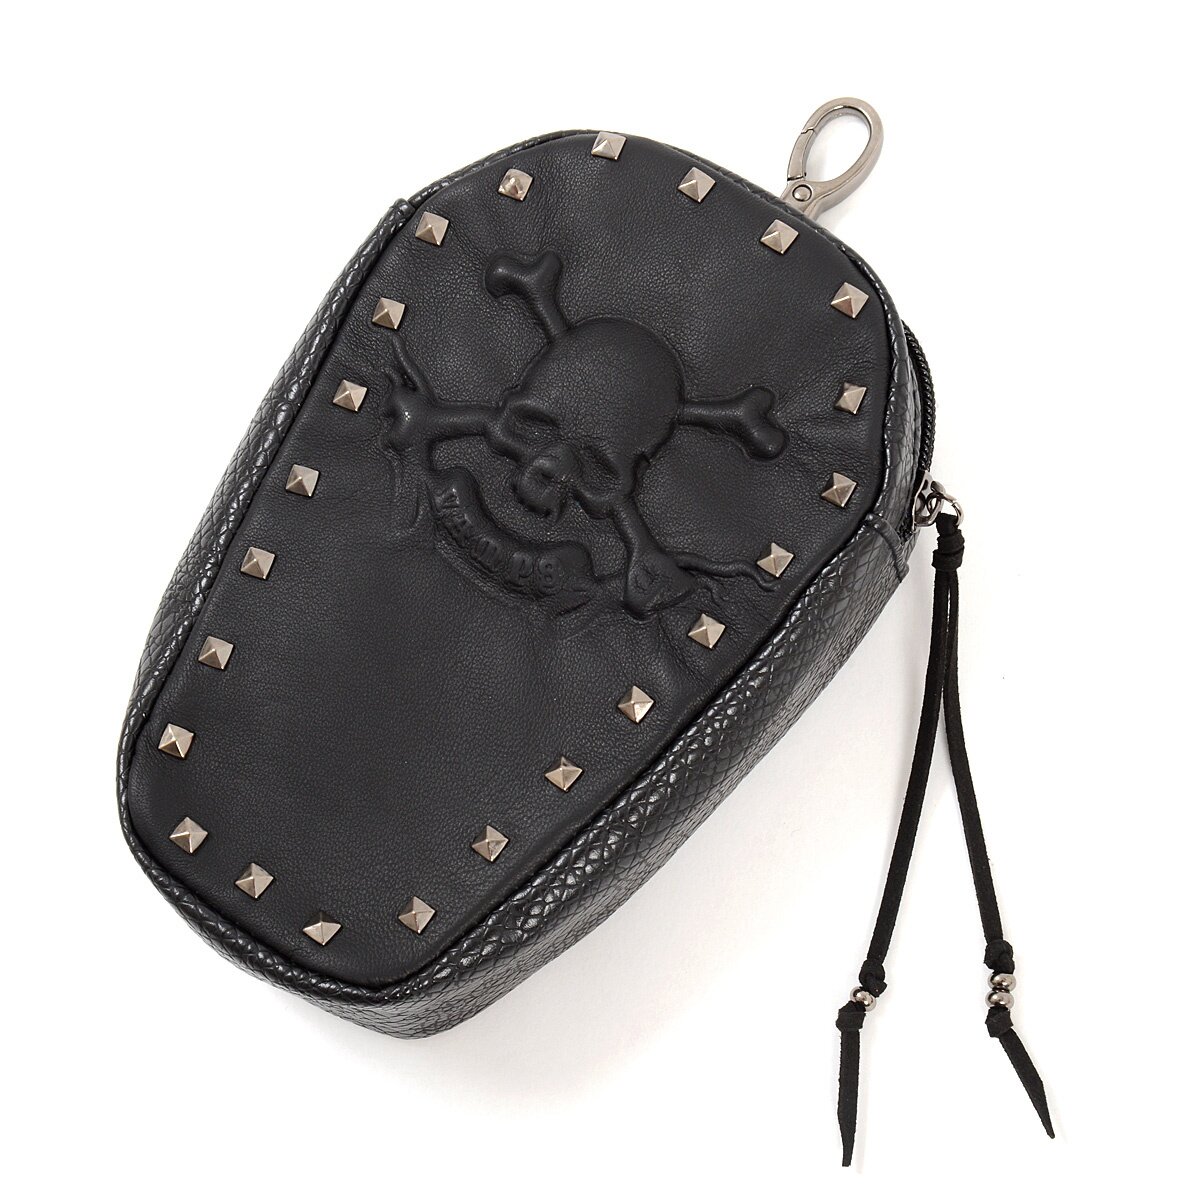 VAMPS Live 2015 Bloodsuckers Coffin Pouch